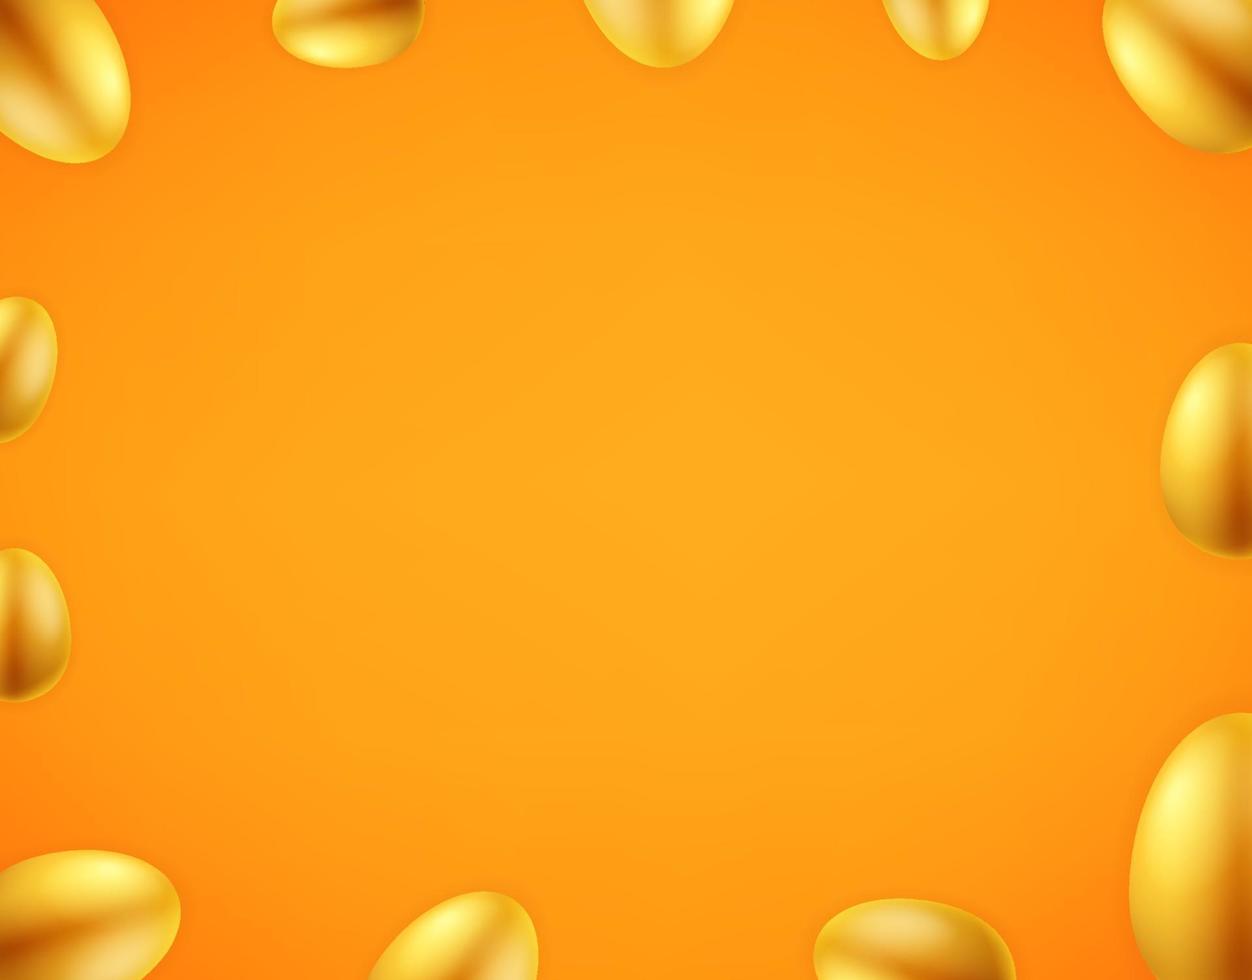 Golden wallpaper with color eggs. Social media message vector background. Copy space for a text